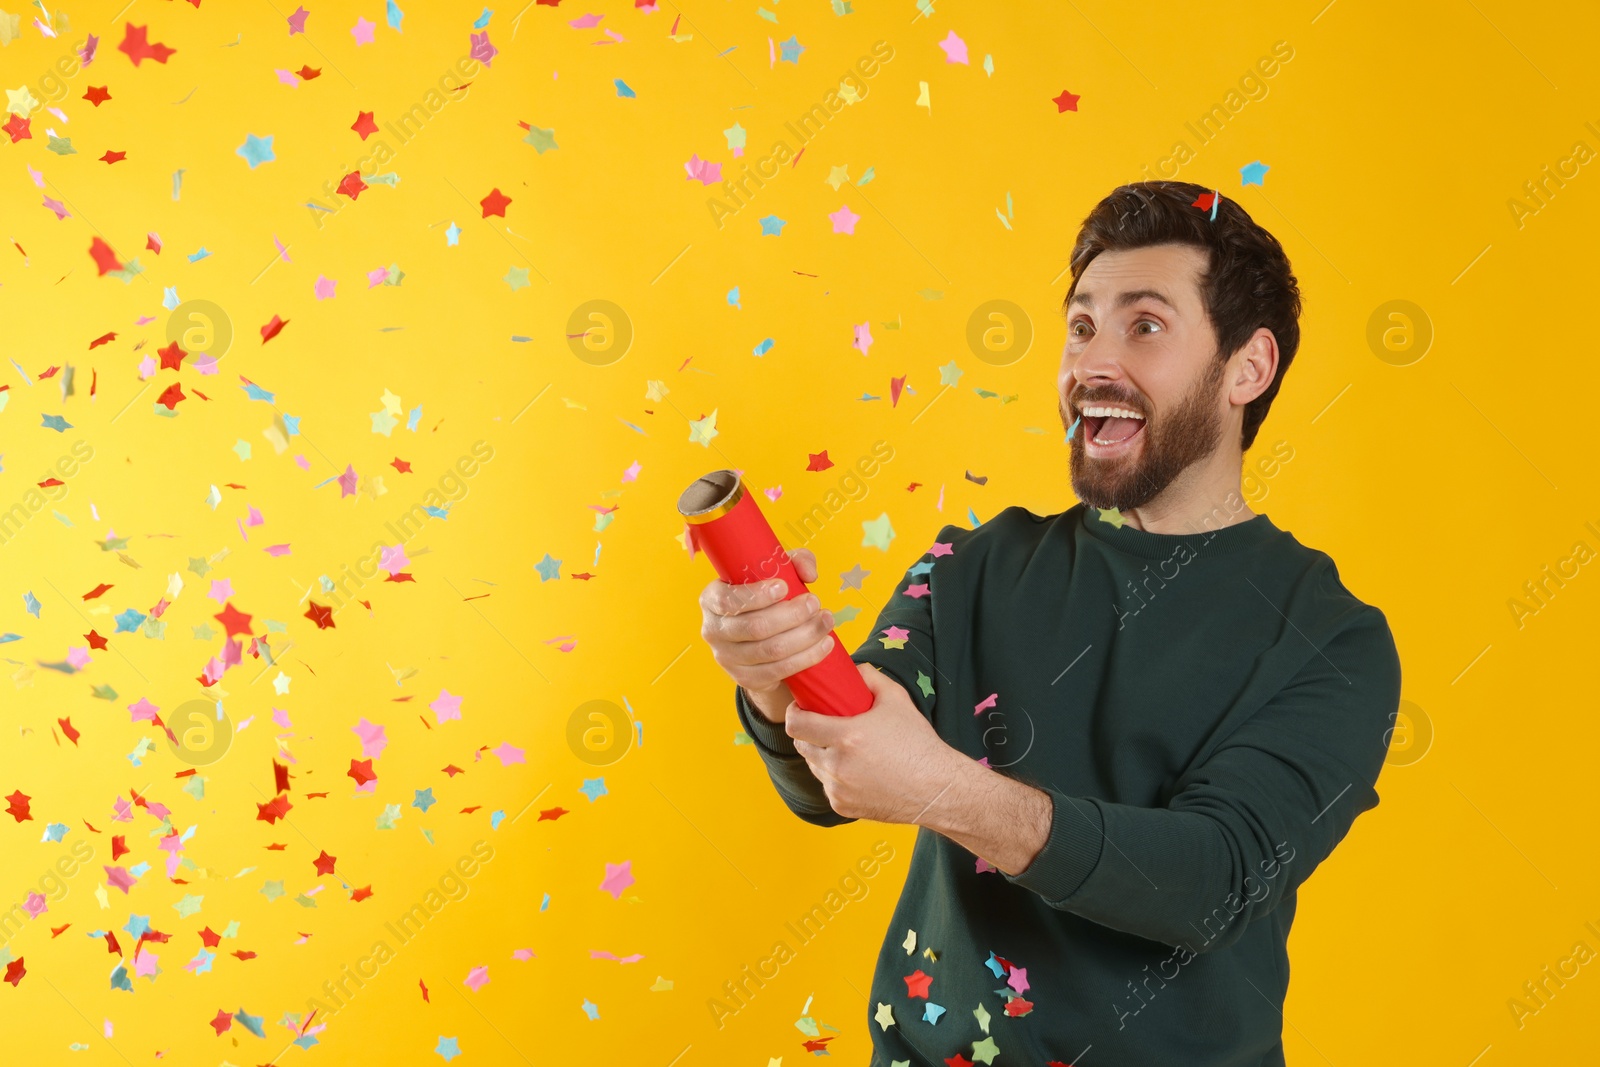 Photo of Emotional man blowing up party popper on yellow background